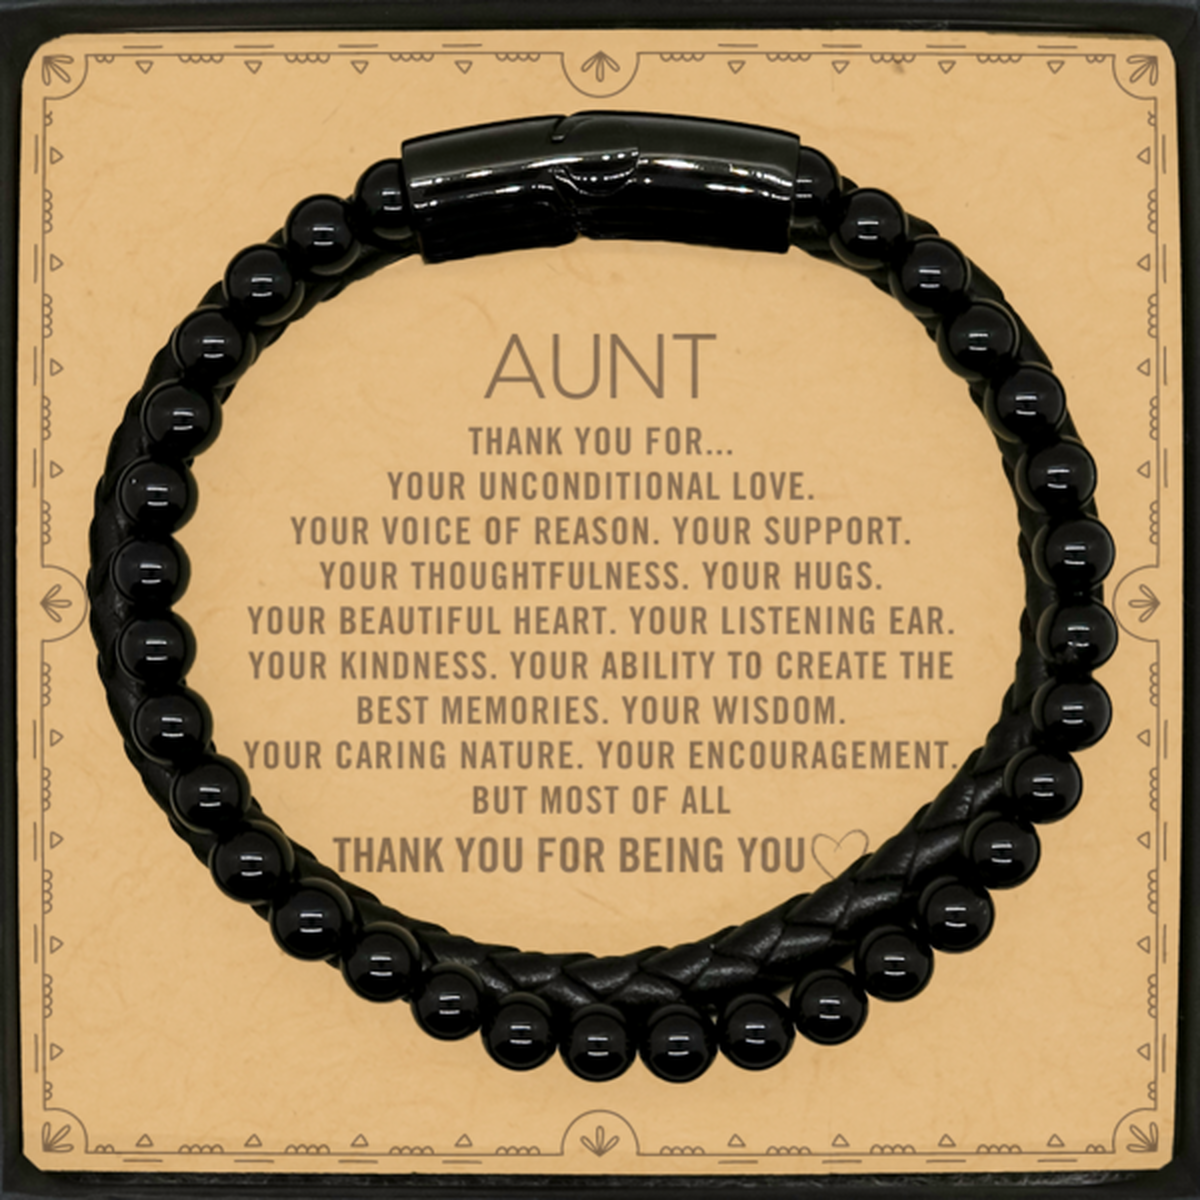 Aunt Stone Leather Bracelets Custom, Message Card Gifts For Aunt Christmas Graduation Birthday Gifts for Men Women Aunt Thank you for Your unconditional love